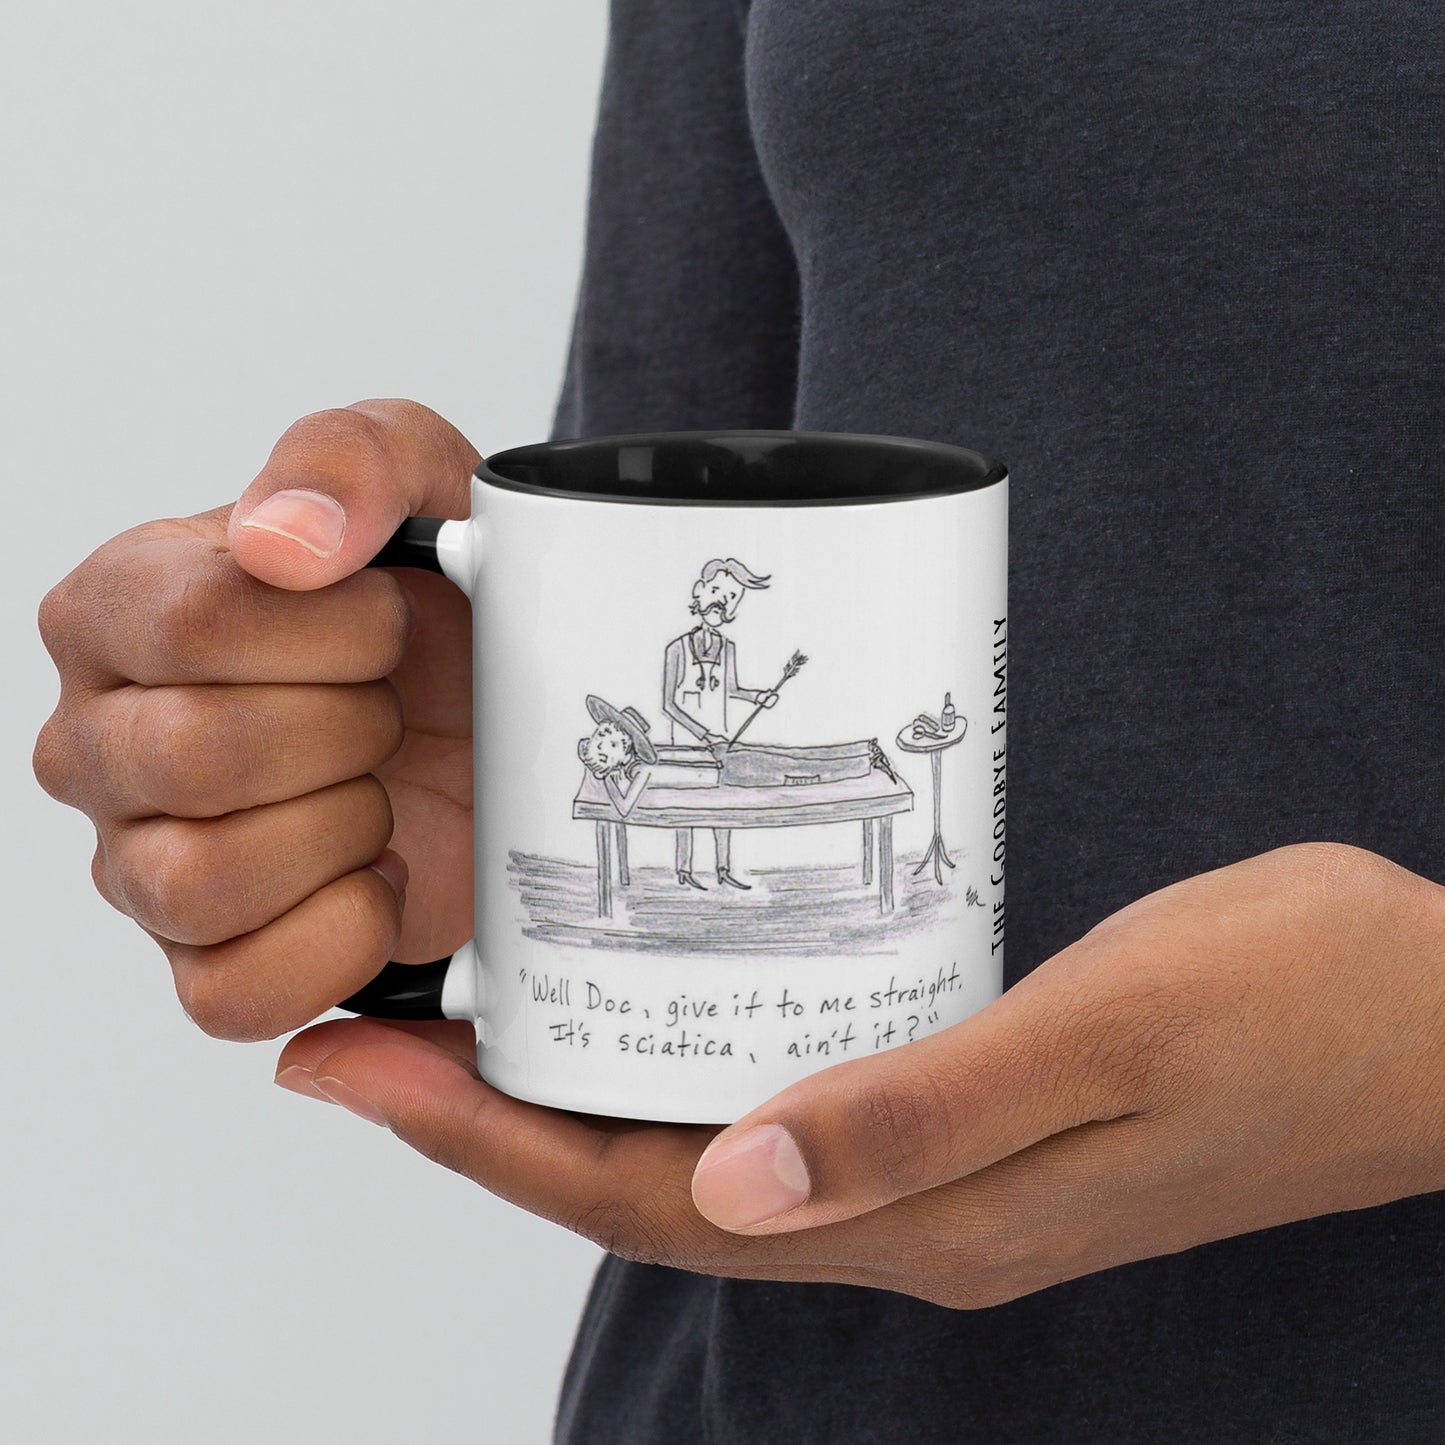 The Goodbye Family Mug Funnies with Black color inside